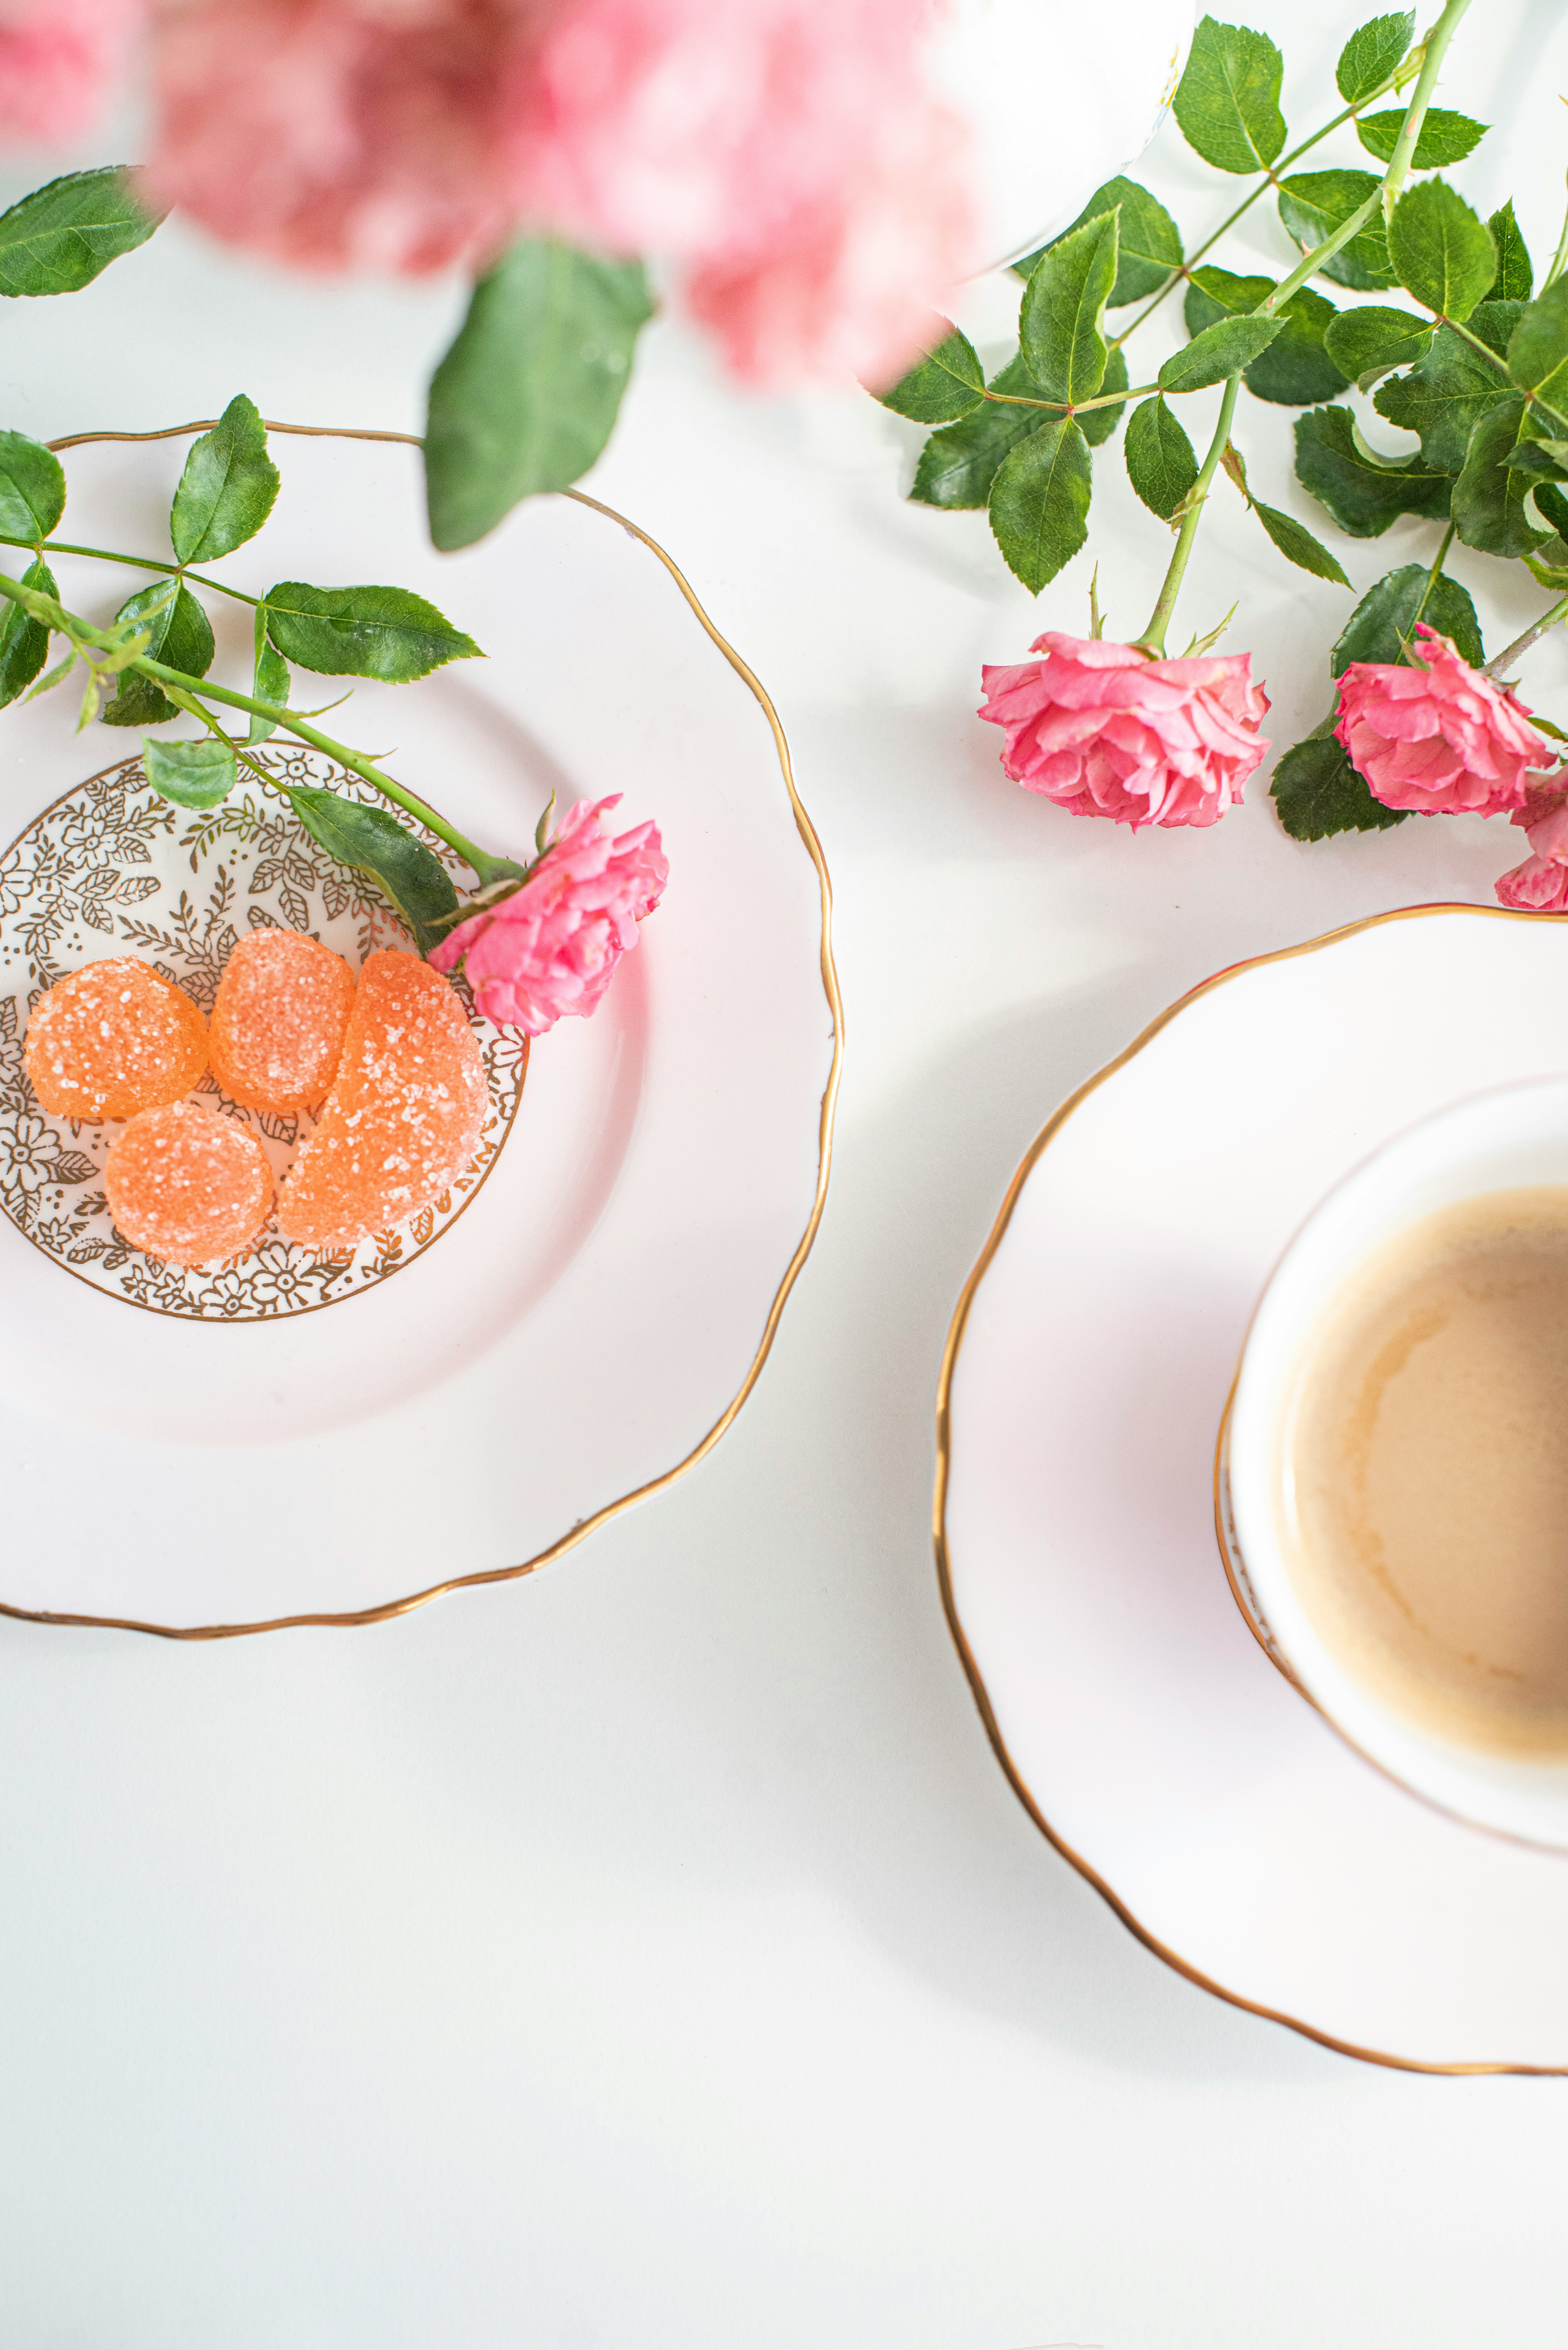 white ceramic cup with saucer beside pink flowers